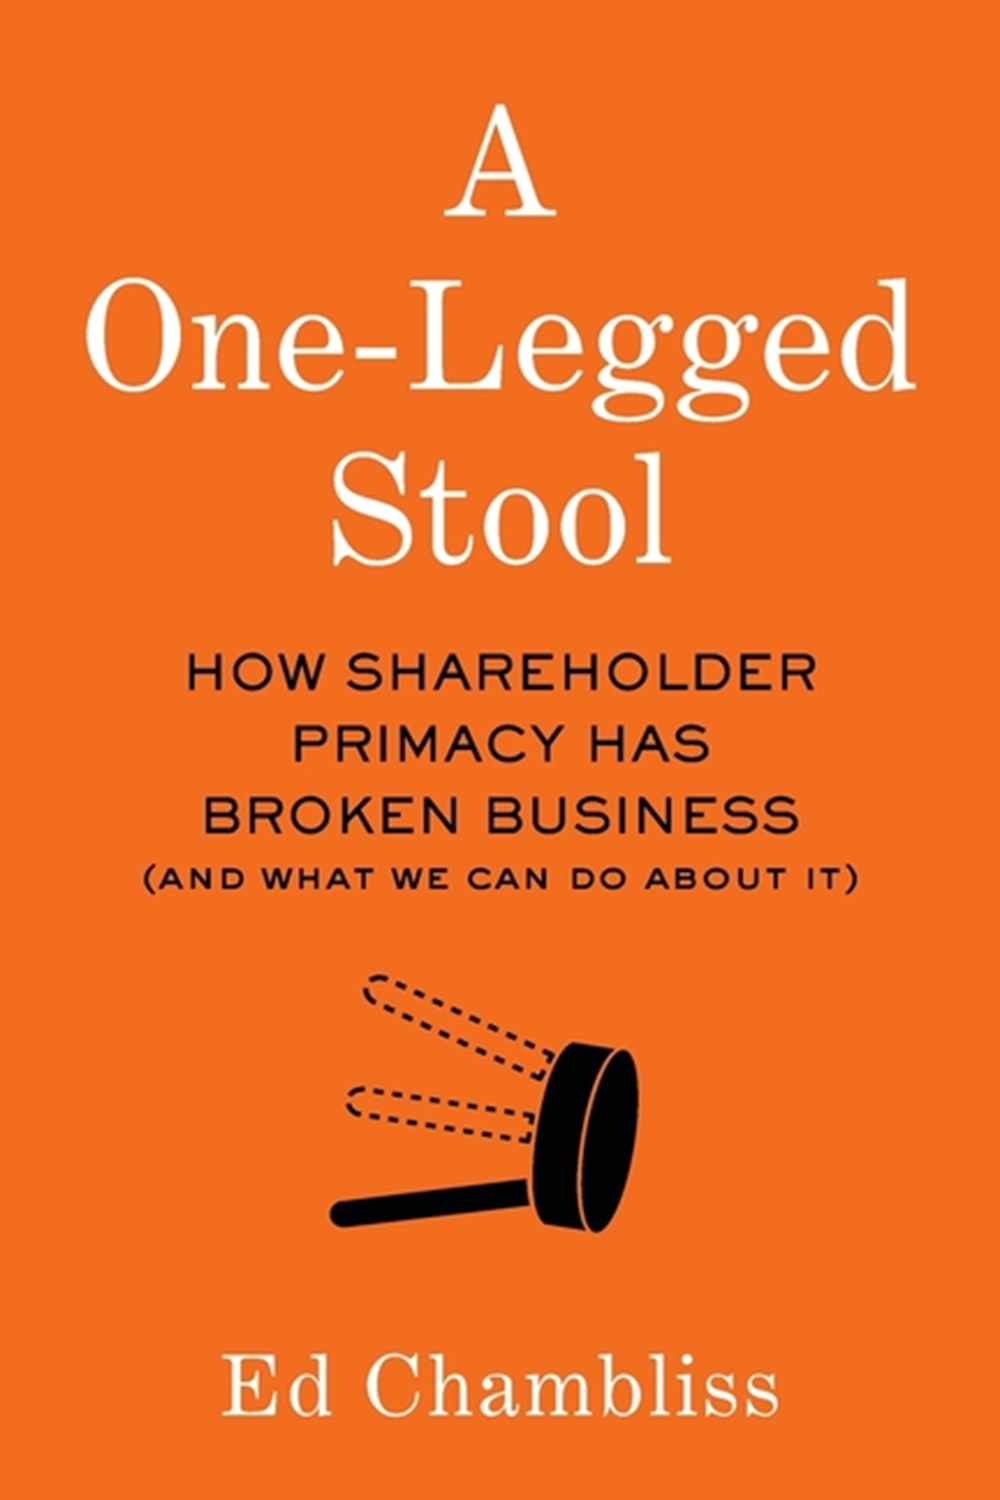 One-Legged Stool How Shareholder Primacy Has Broken Business (And What We Can Do About It)